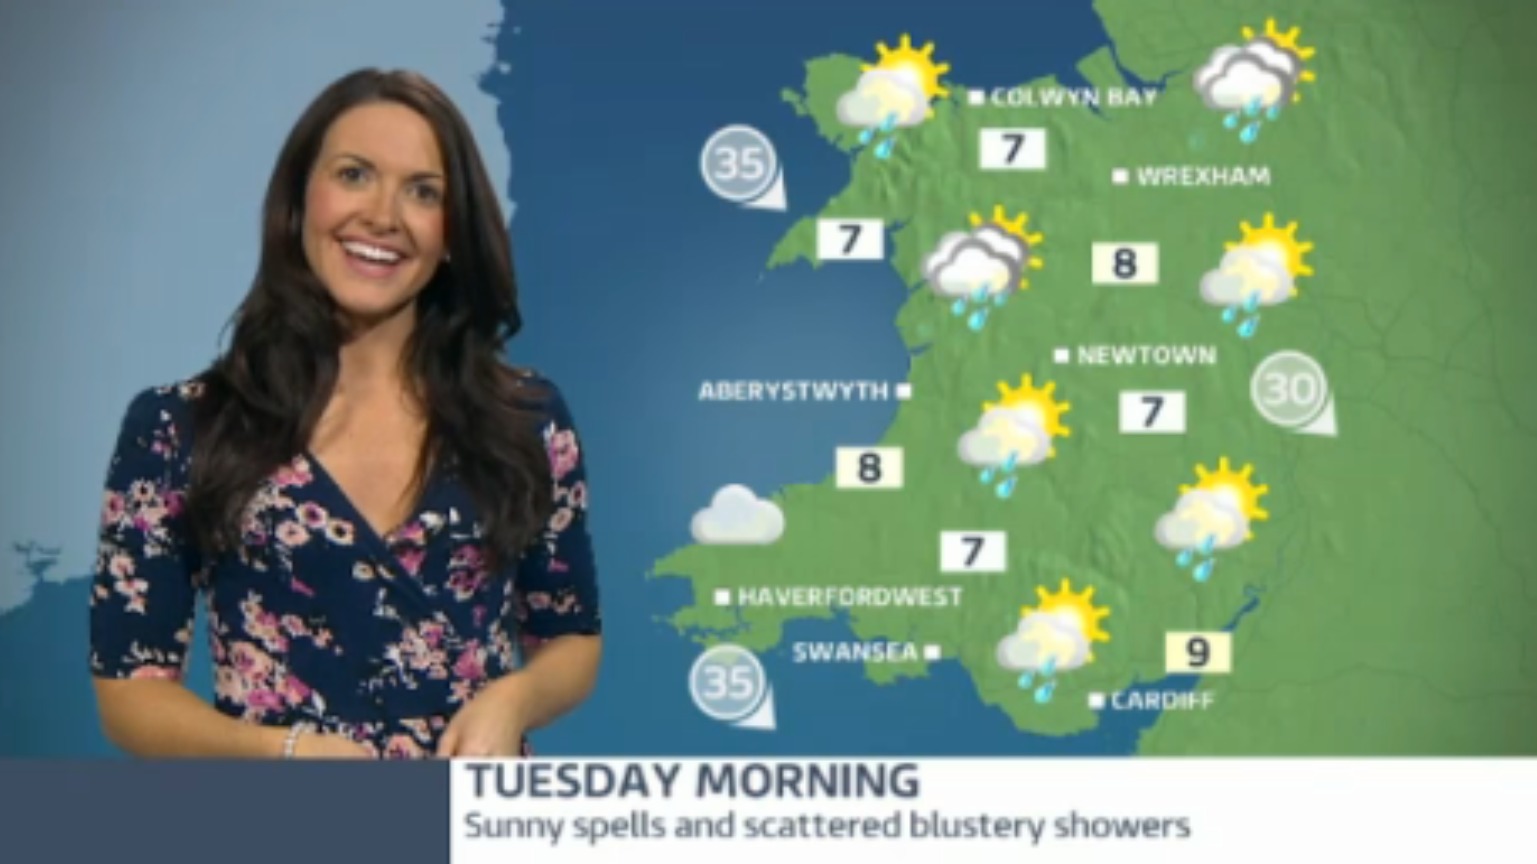 Wales weather: Strong winds, sunny spells and showers | ITV News Wales